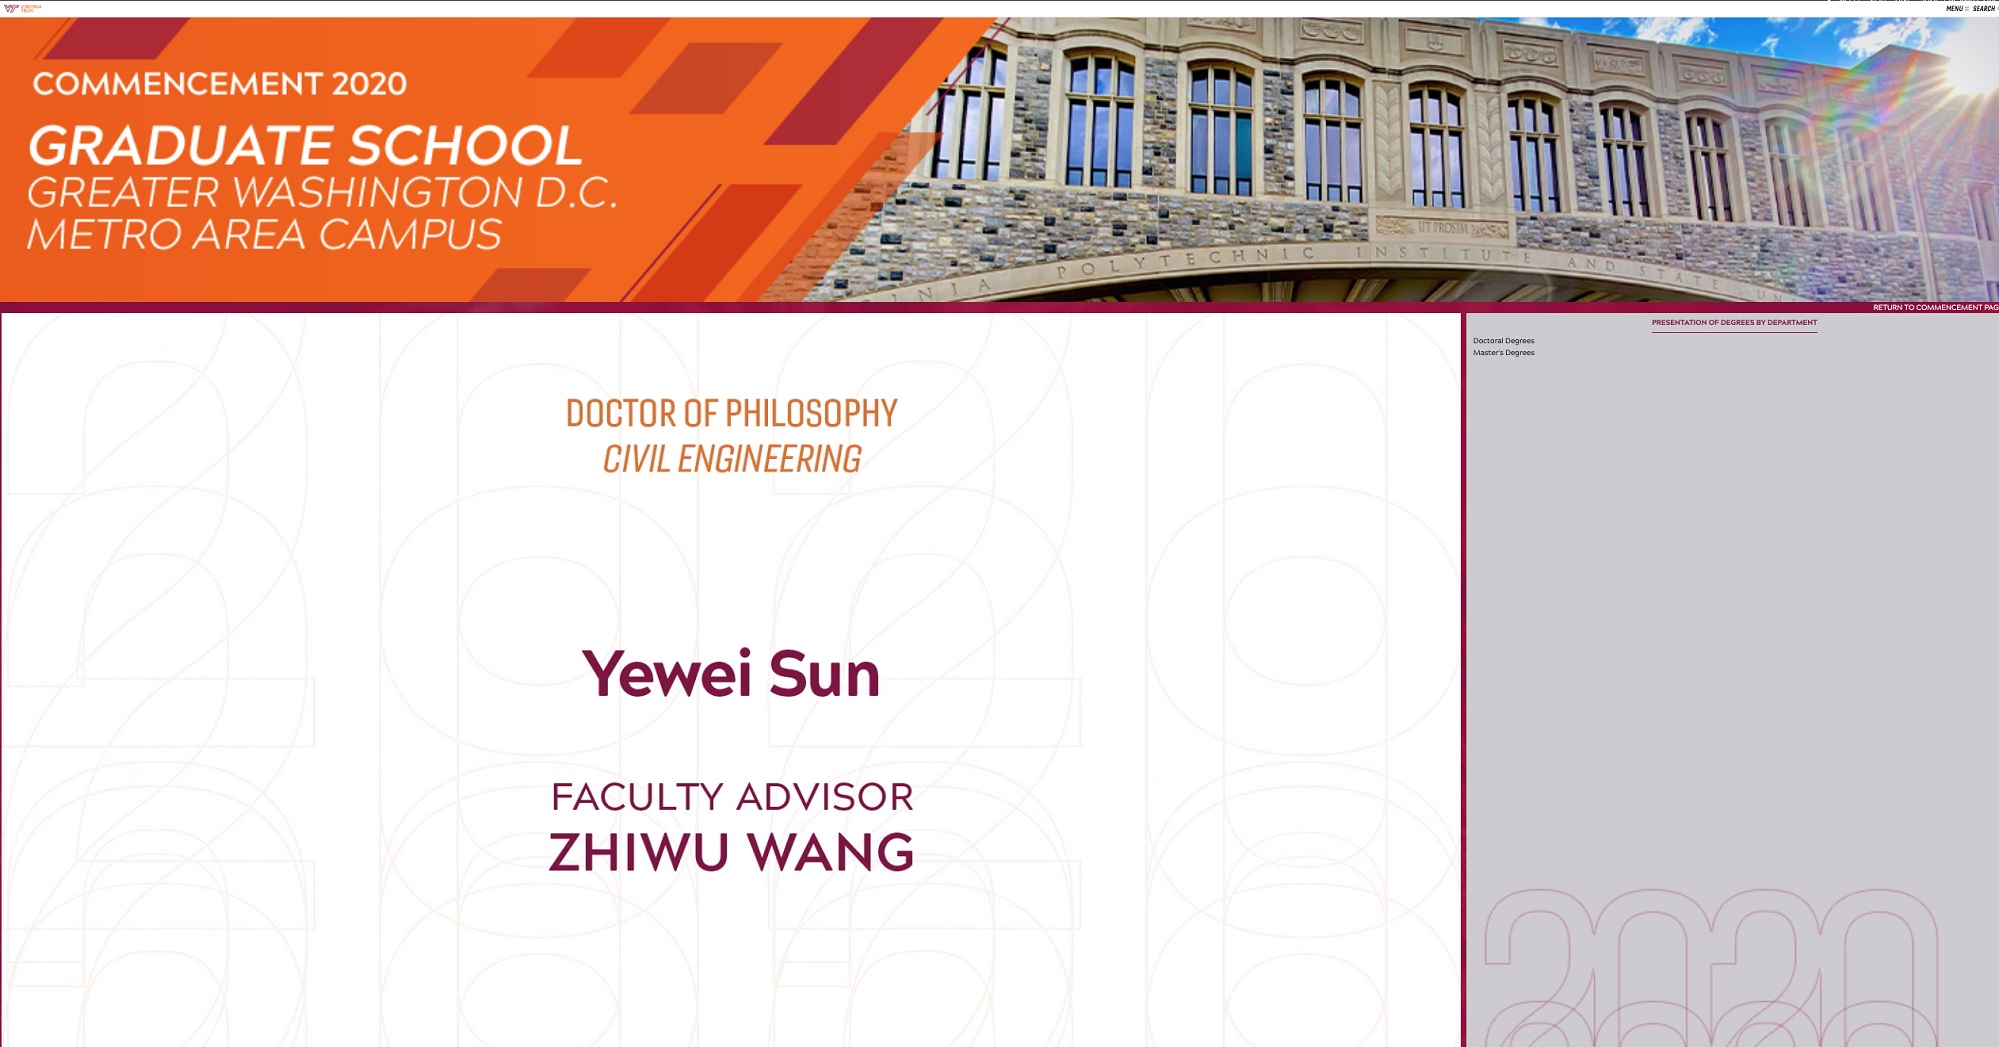 Virtual commencement for Drs. Sun and Zhang! Congratulation!